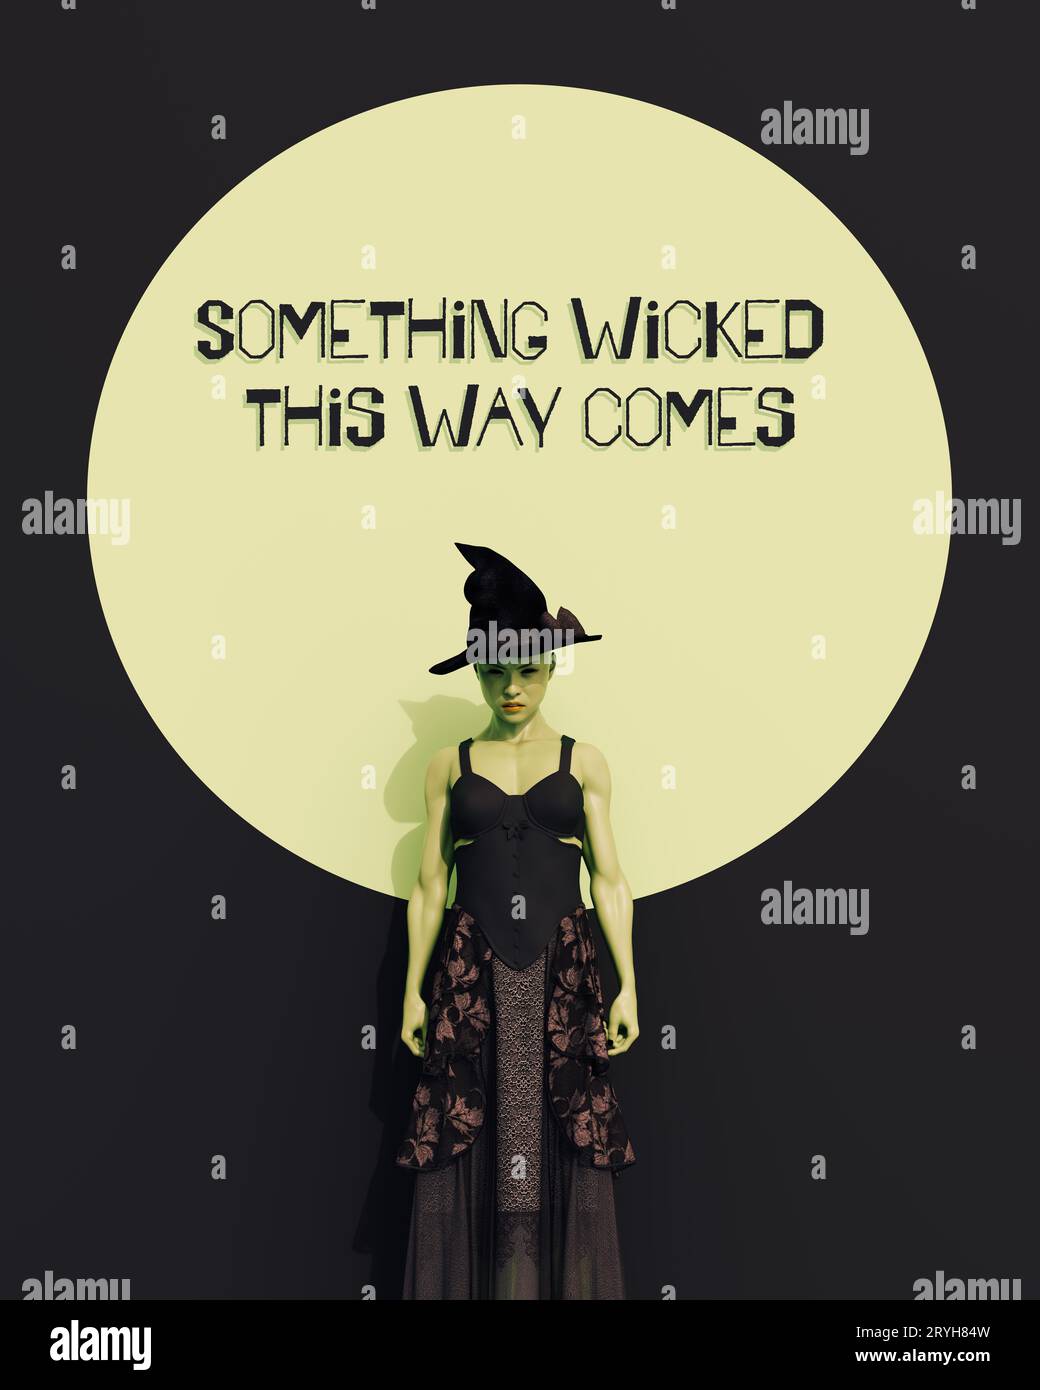 Pale green witch black dress witches hat Halloween something wicked this way comes circle background costume 3d illustration render digital rendering Stock Photo